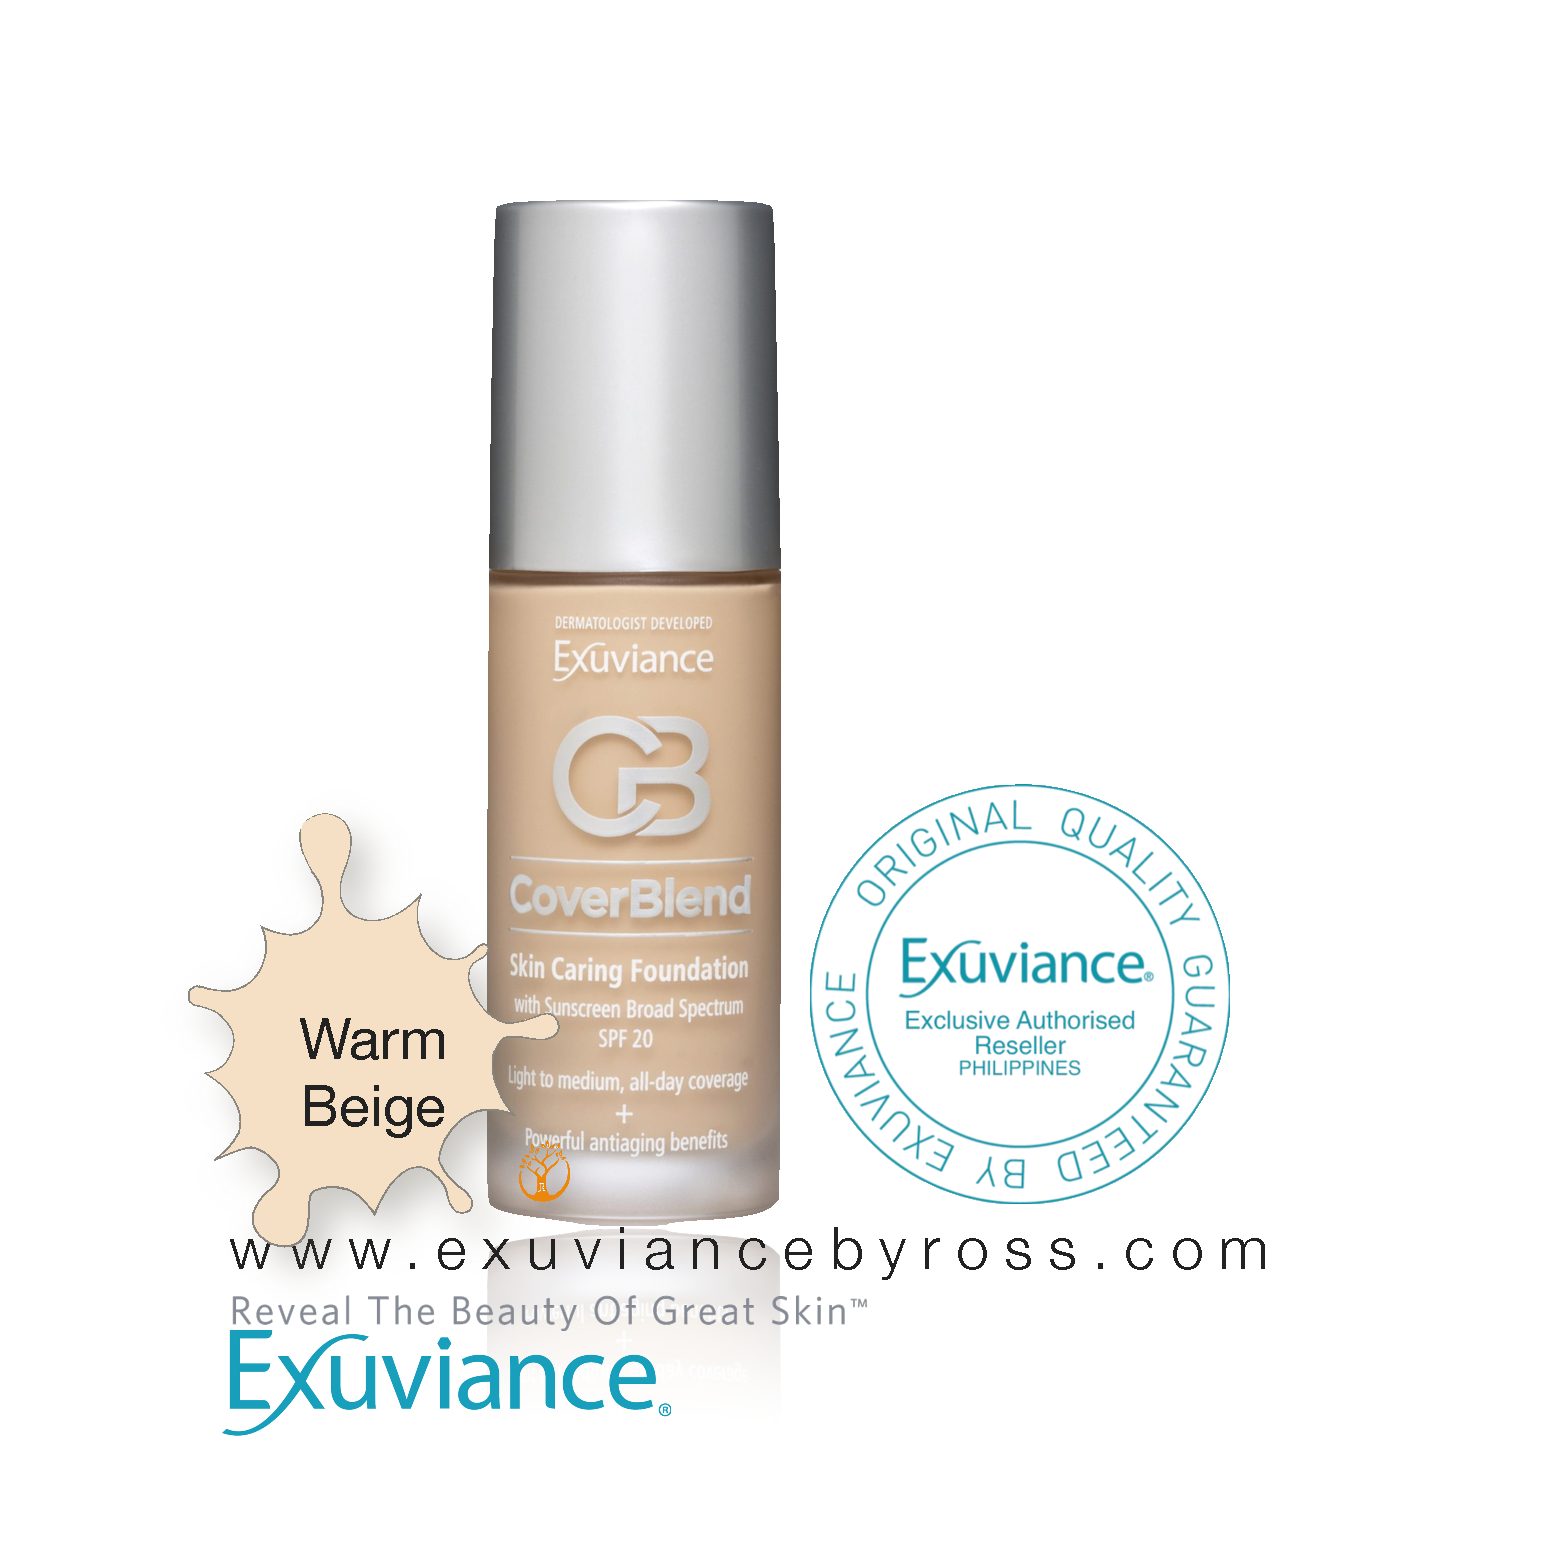 Exuviance CoverBlend Skin Caring Foundation SPF 20 30mL – Warm